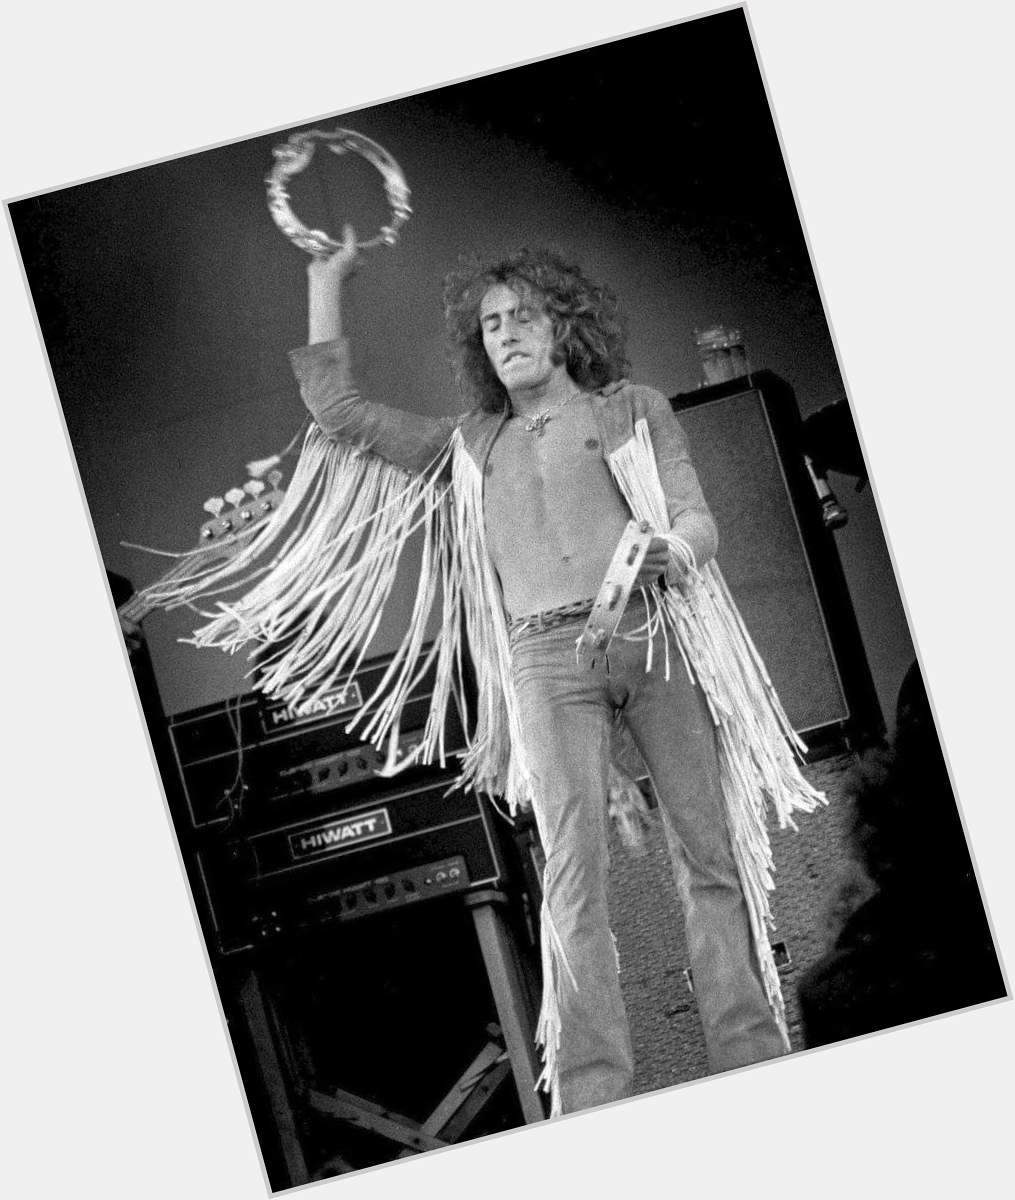 Happy Birthday to Roger Daltrey of The Who, who turns 74 today! 